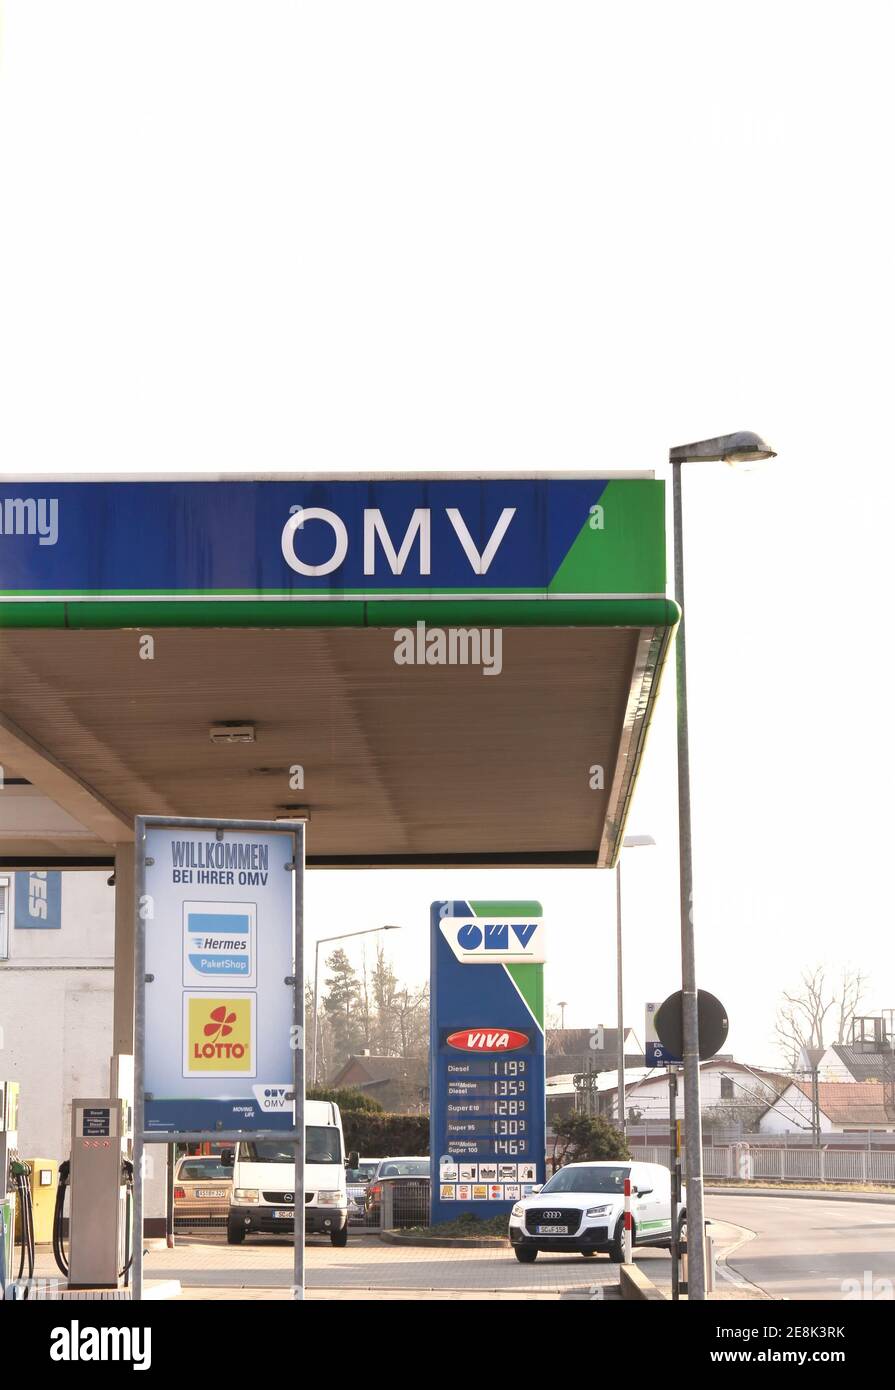 OMV petrol filling station. OMV was founded in 1956 and is the Austria's largest oil industry company Stock Photo